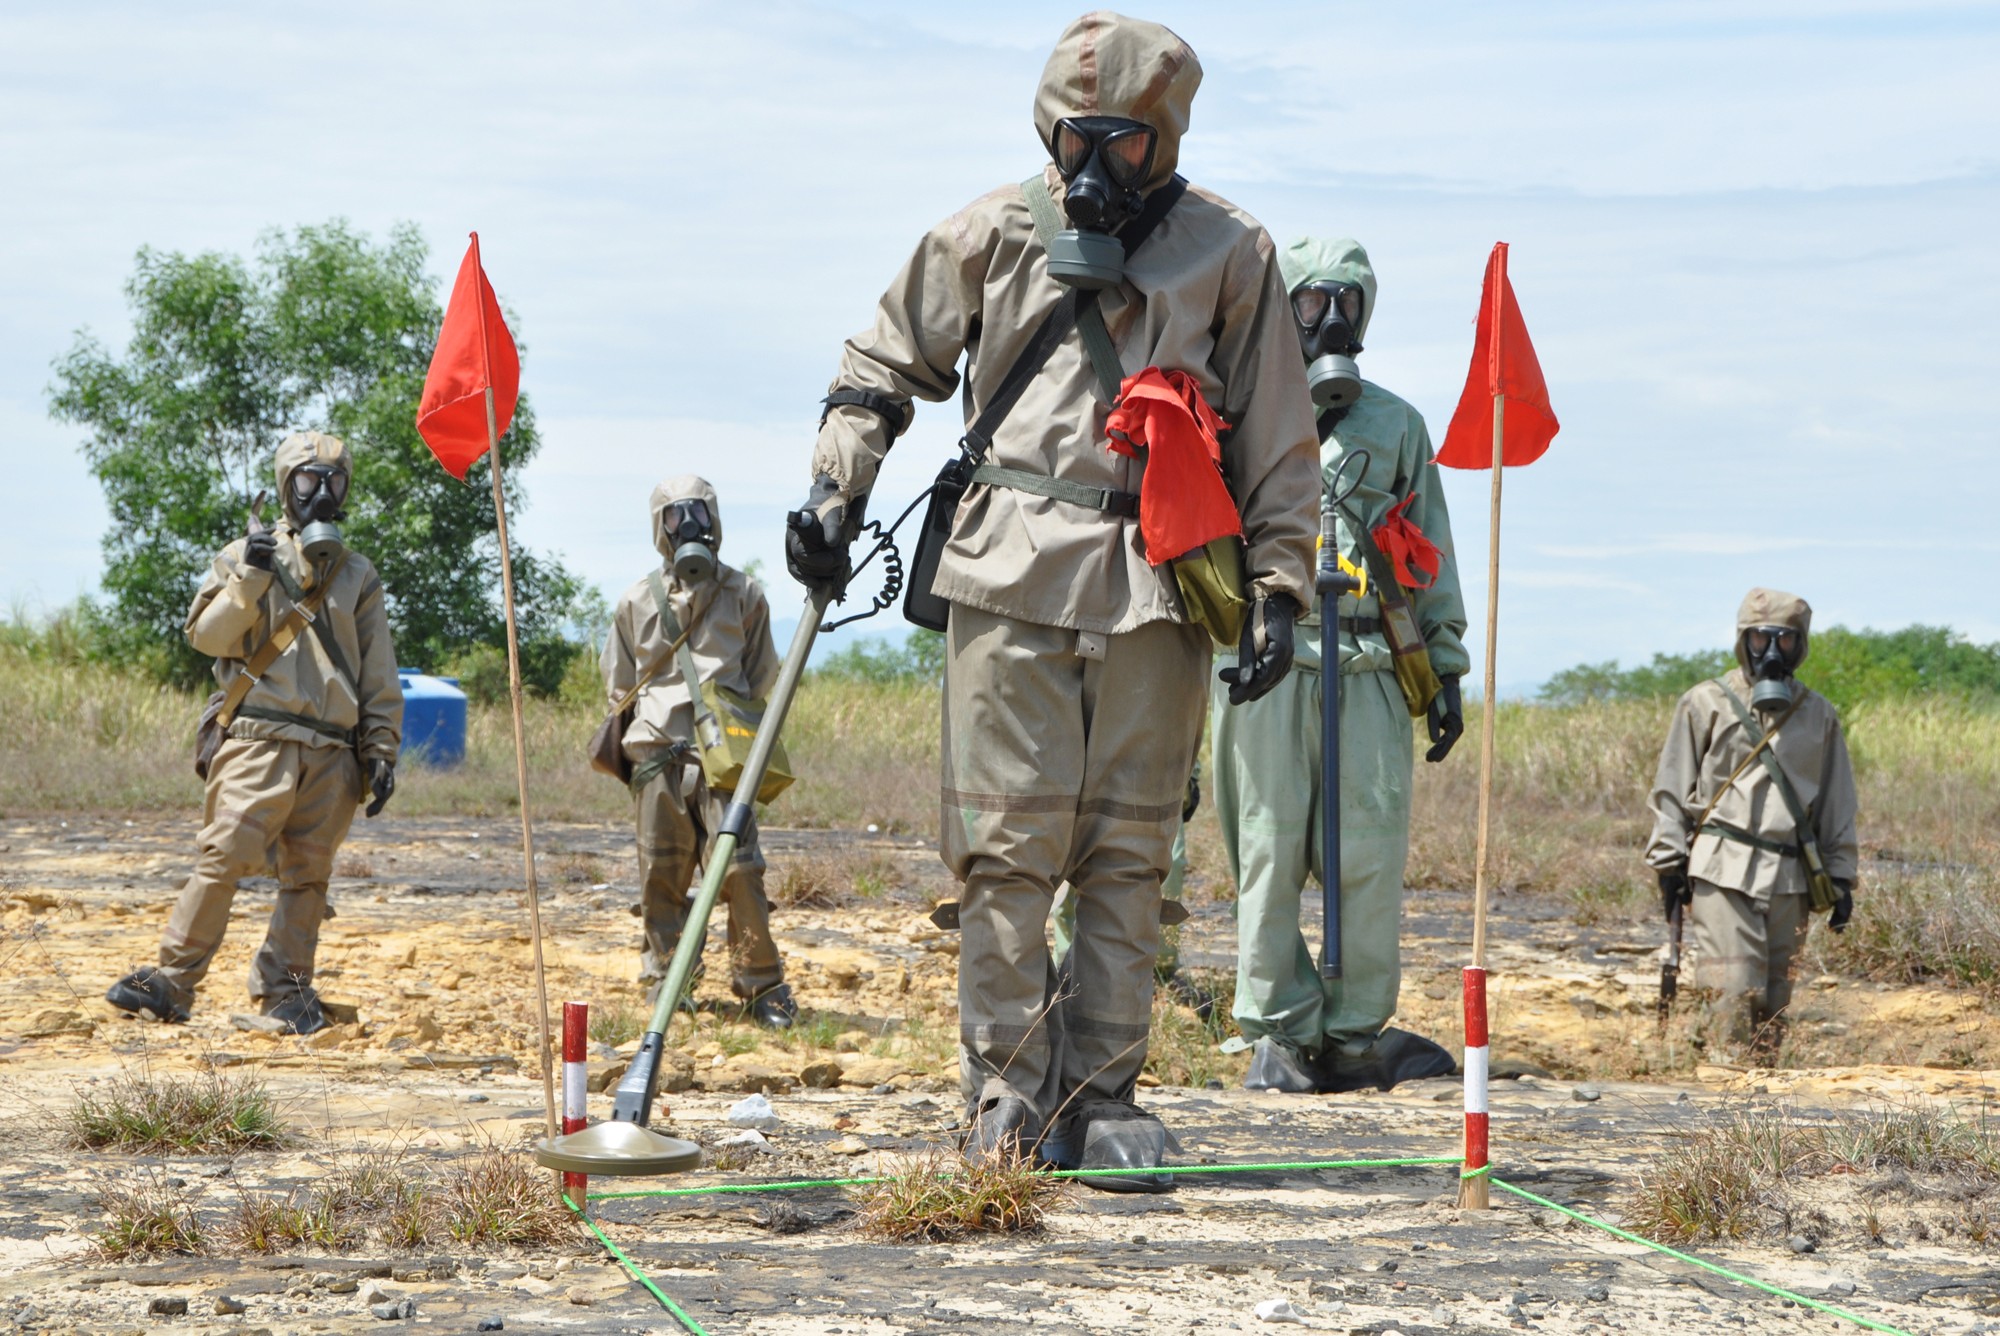 Soldiers in protective gear search for unexploded ordnance at the central Vietnamese city of Danang’s airport. Photo: AFP